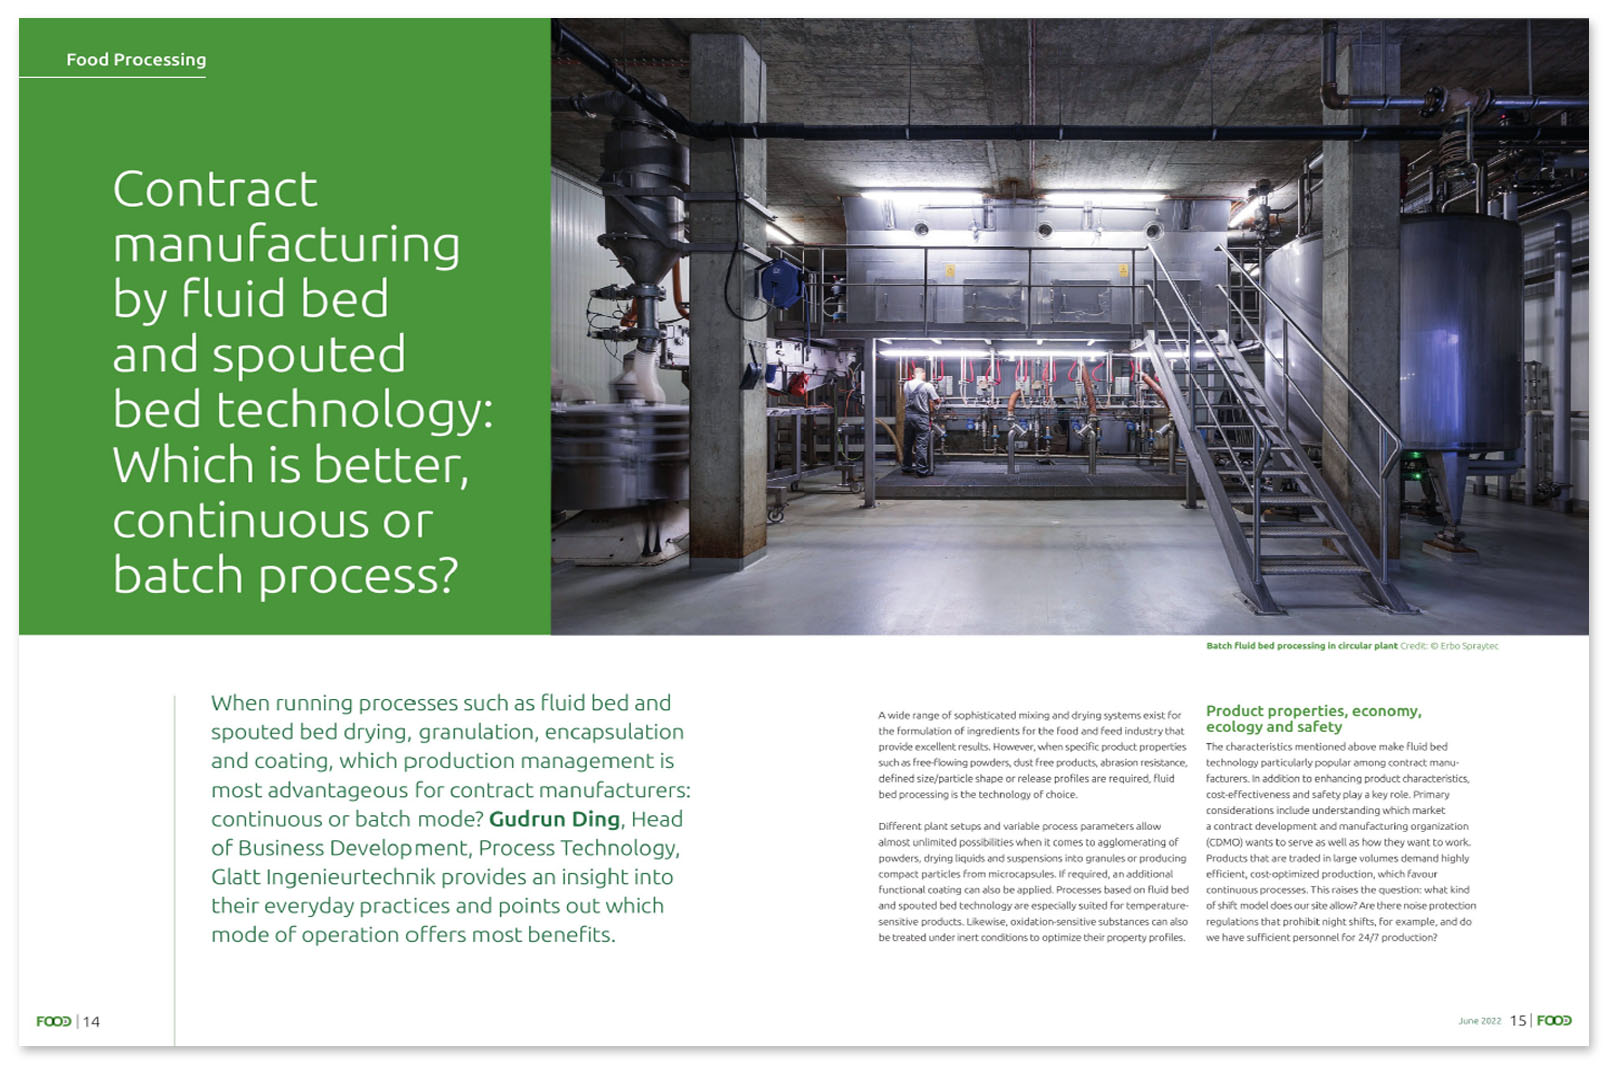 Glatt article on ''Contract manufacturing by fluid bed and spouted bed technology: Which is better, continuous or batch process?'', published in the magazine 'FEI - Food Engineering & Ingredients', issue Juni/2022, PanGlobal Media